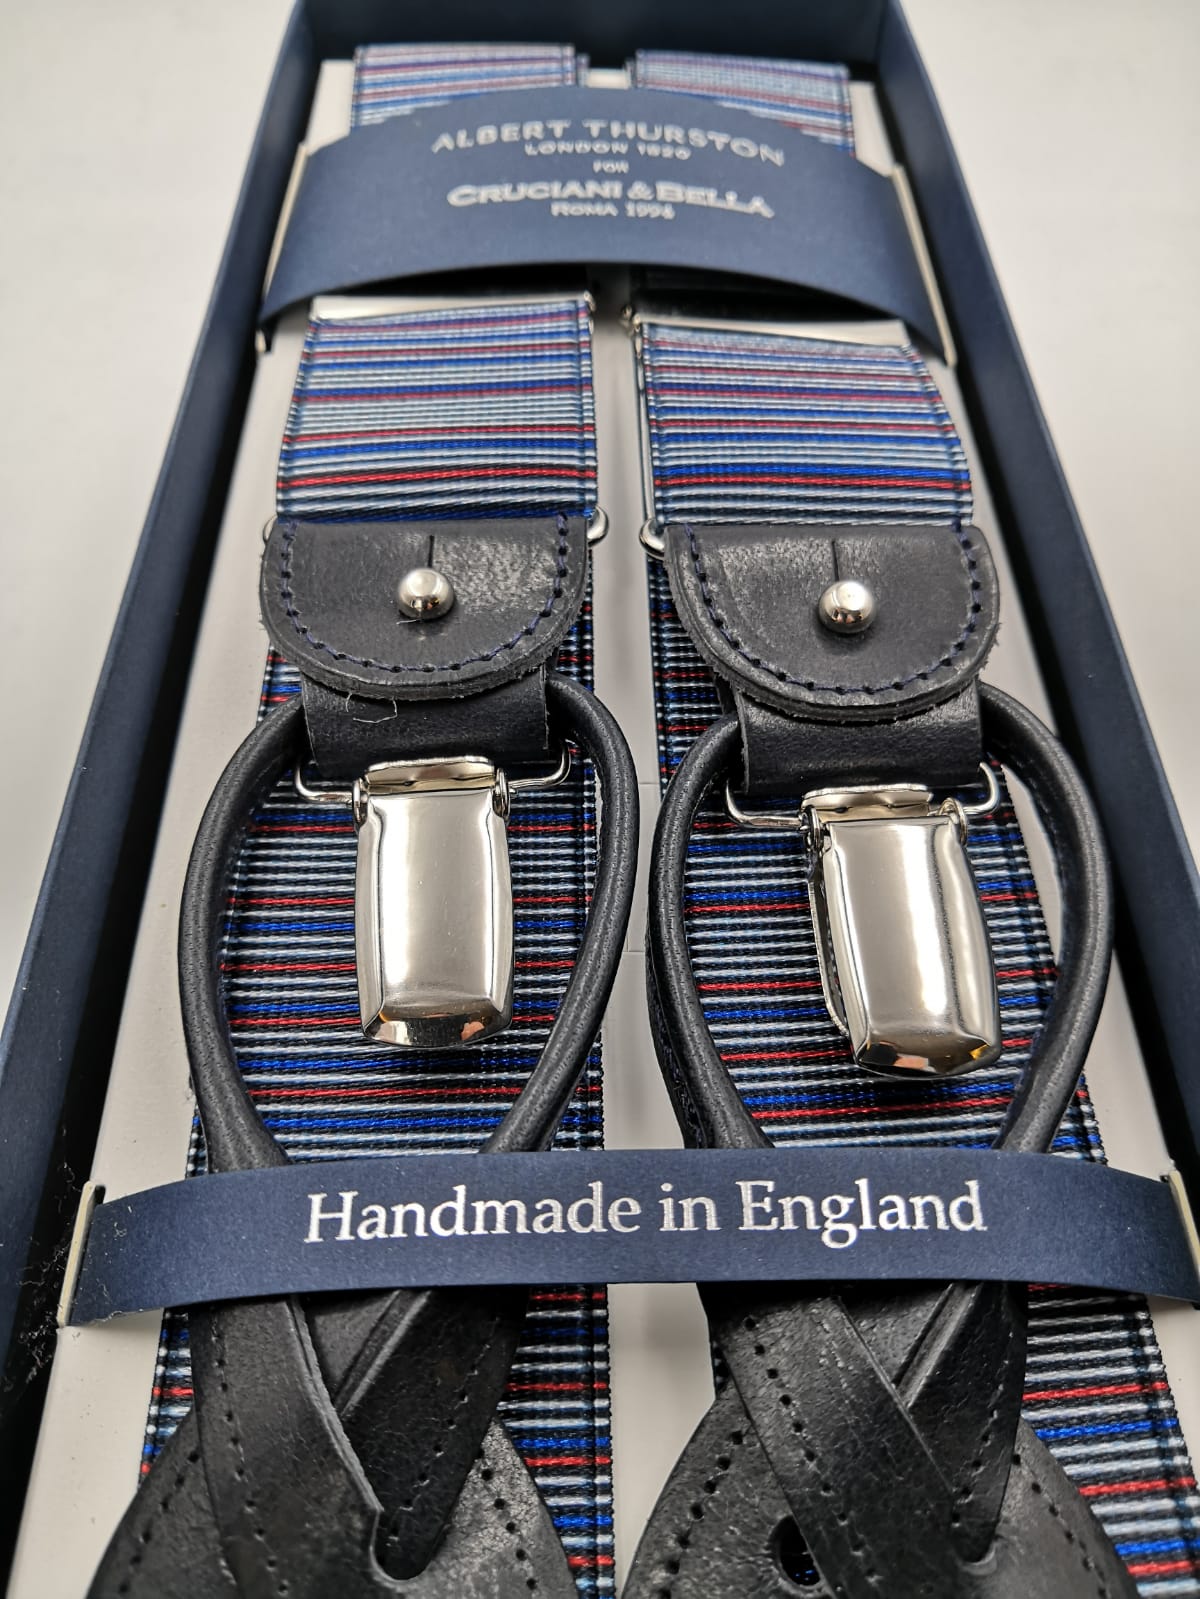 Albert Thurston for Cruciani & Bella Made in England 2 in 1 Adjustable Sizing 35 mm elastic braces Blue, Rust and White multicolor stripes Y-Shaped Nickel Fittings #5640